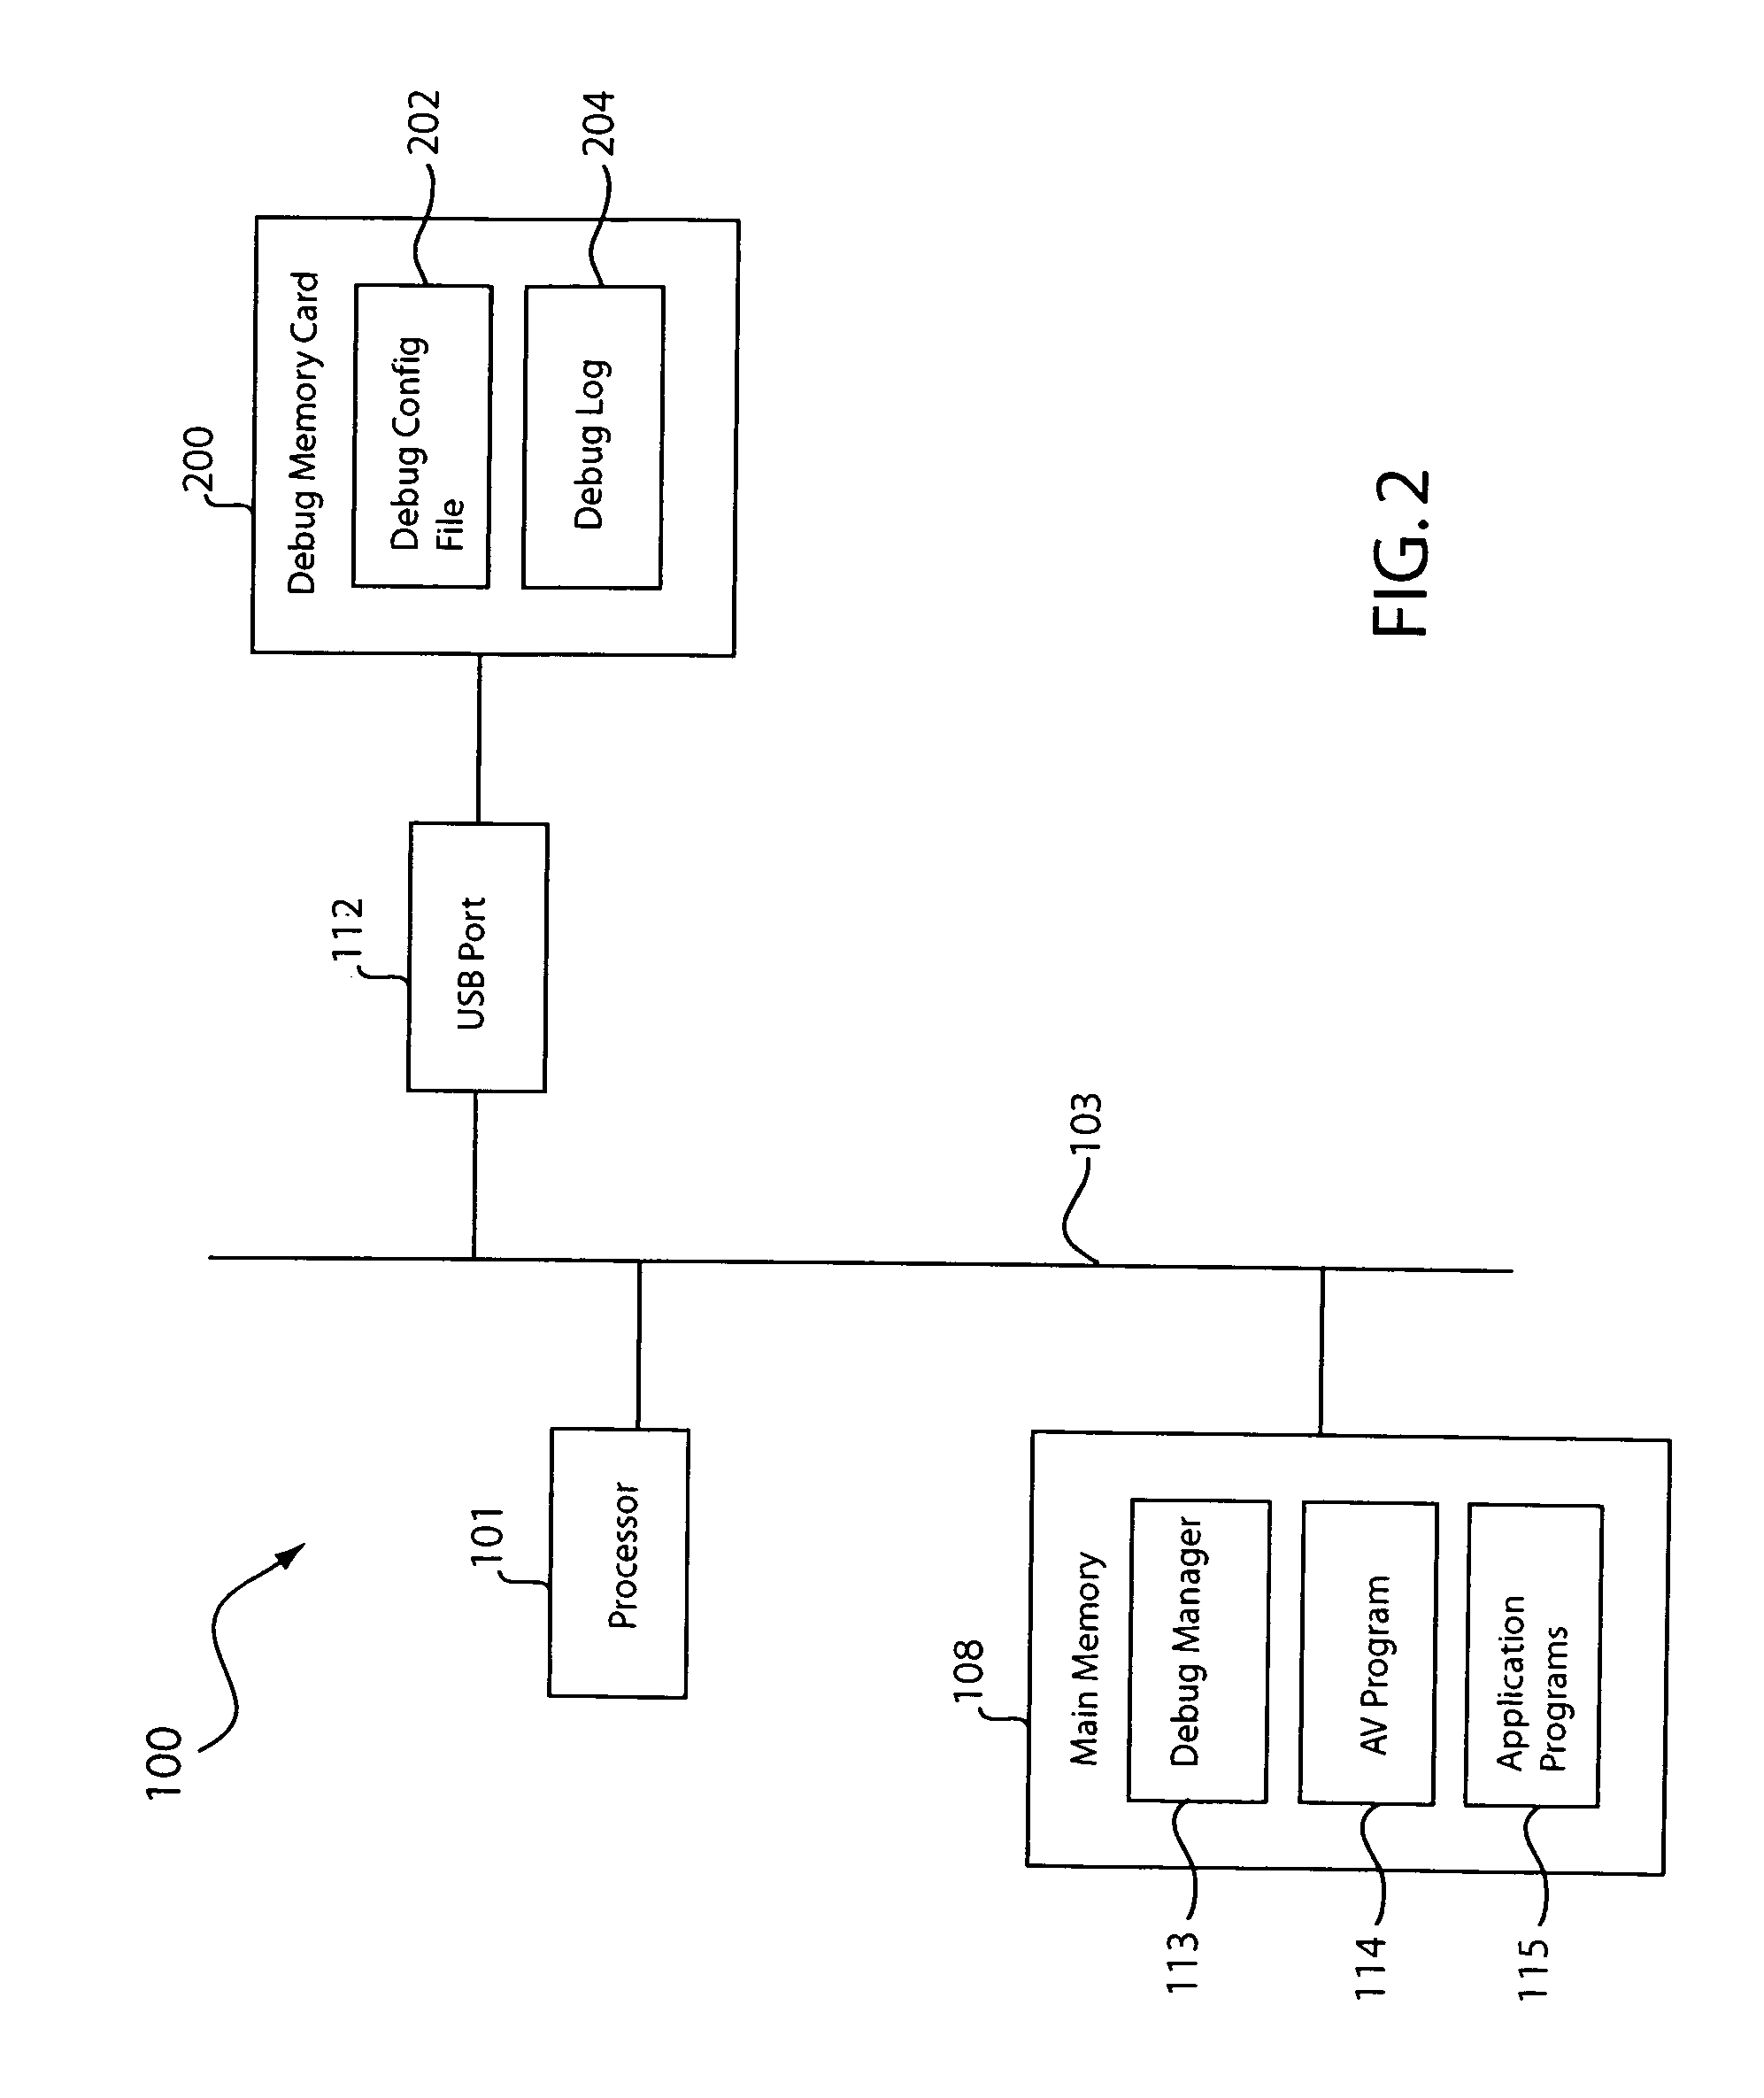 Generation of debug information for debugging a network security appliance